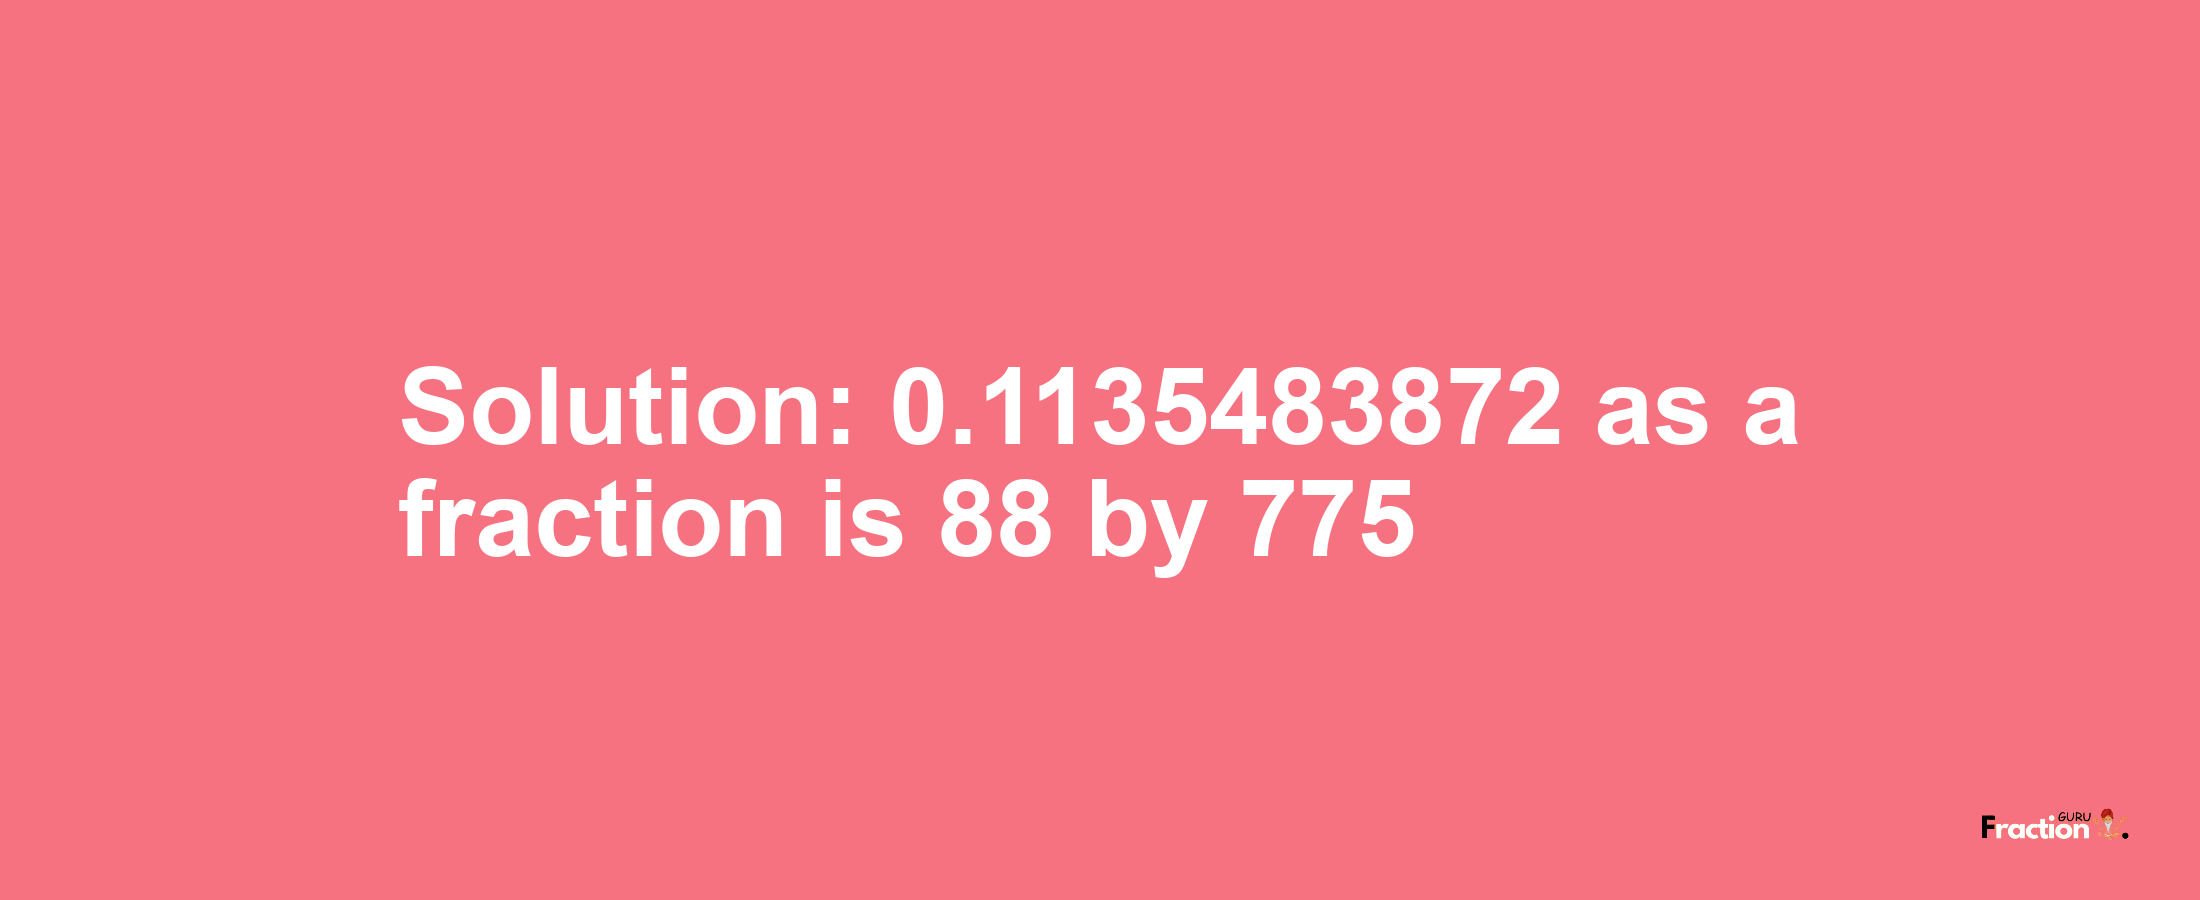 Solution:0.1135483872 as a fraction is 88/775